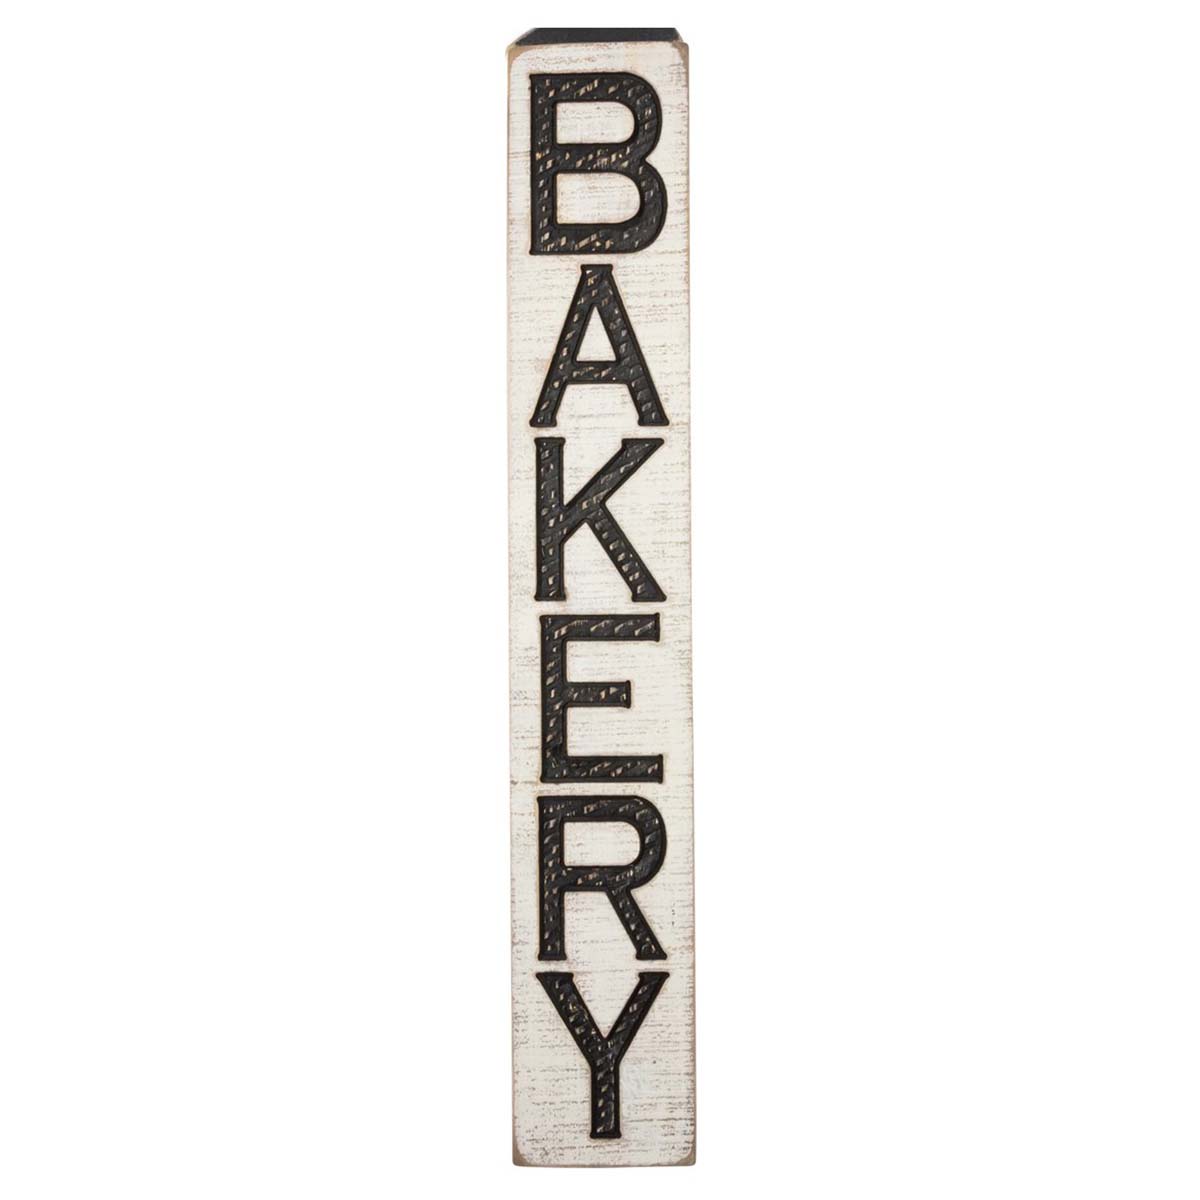 Carved Sign - Bakery